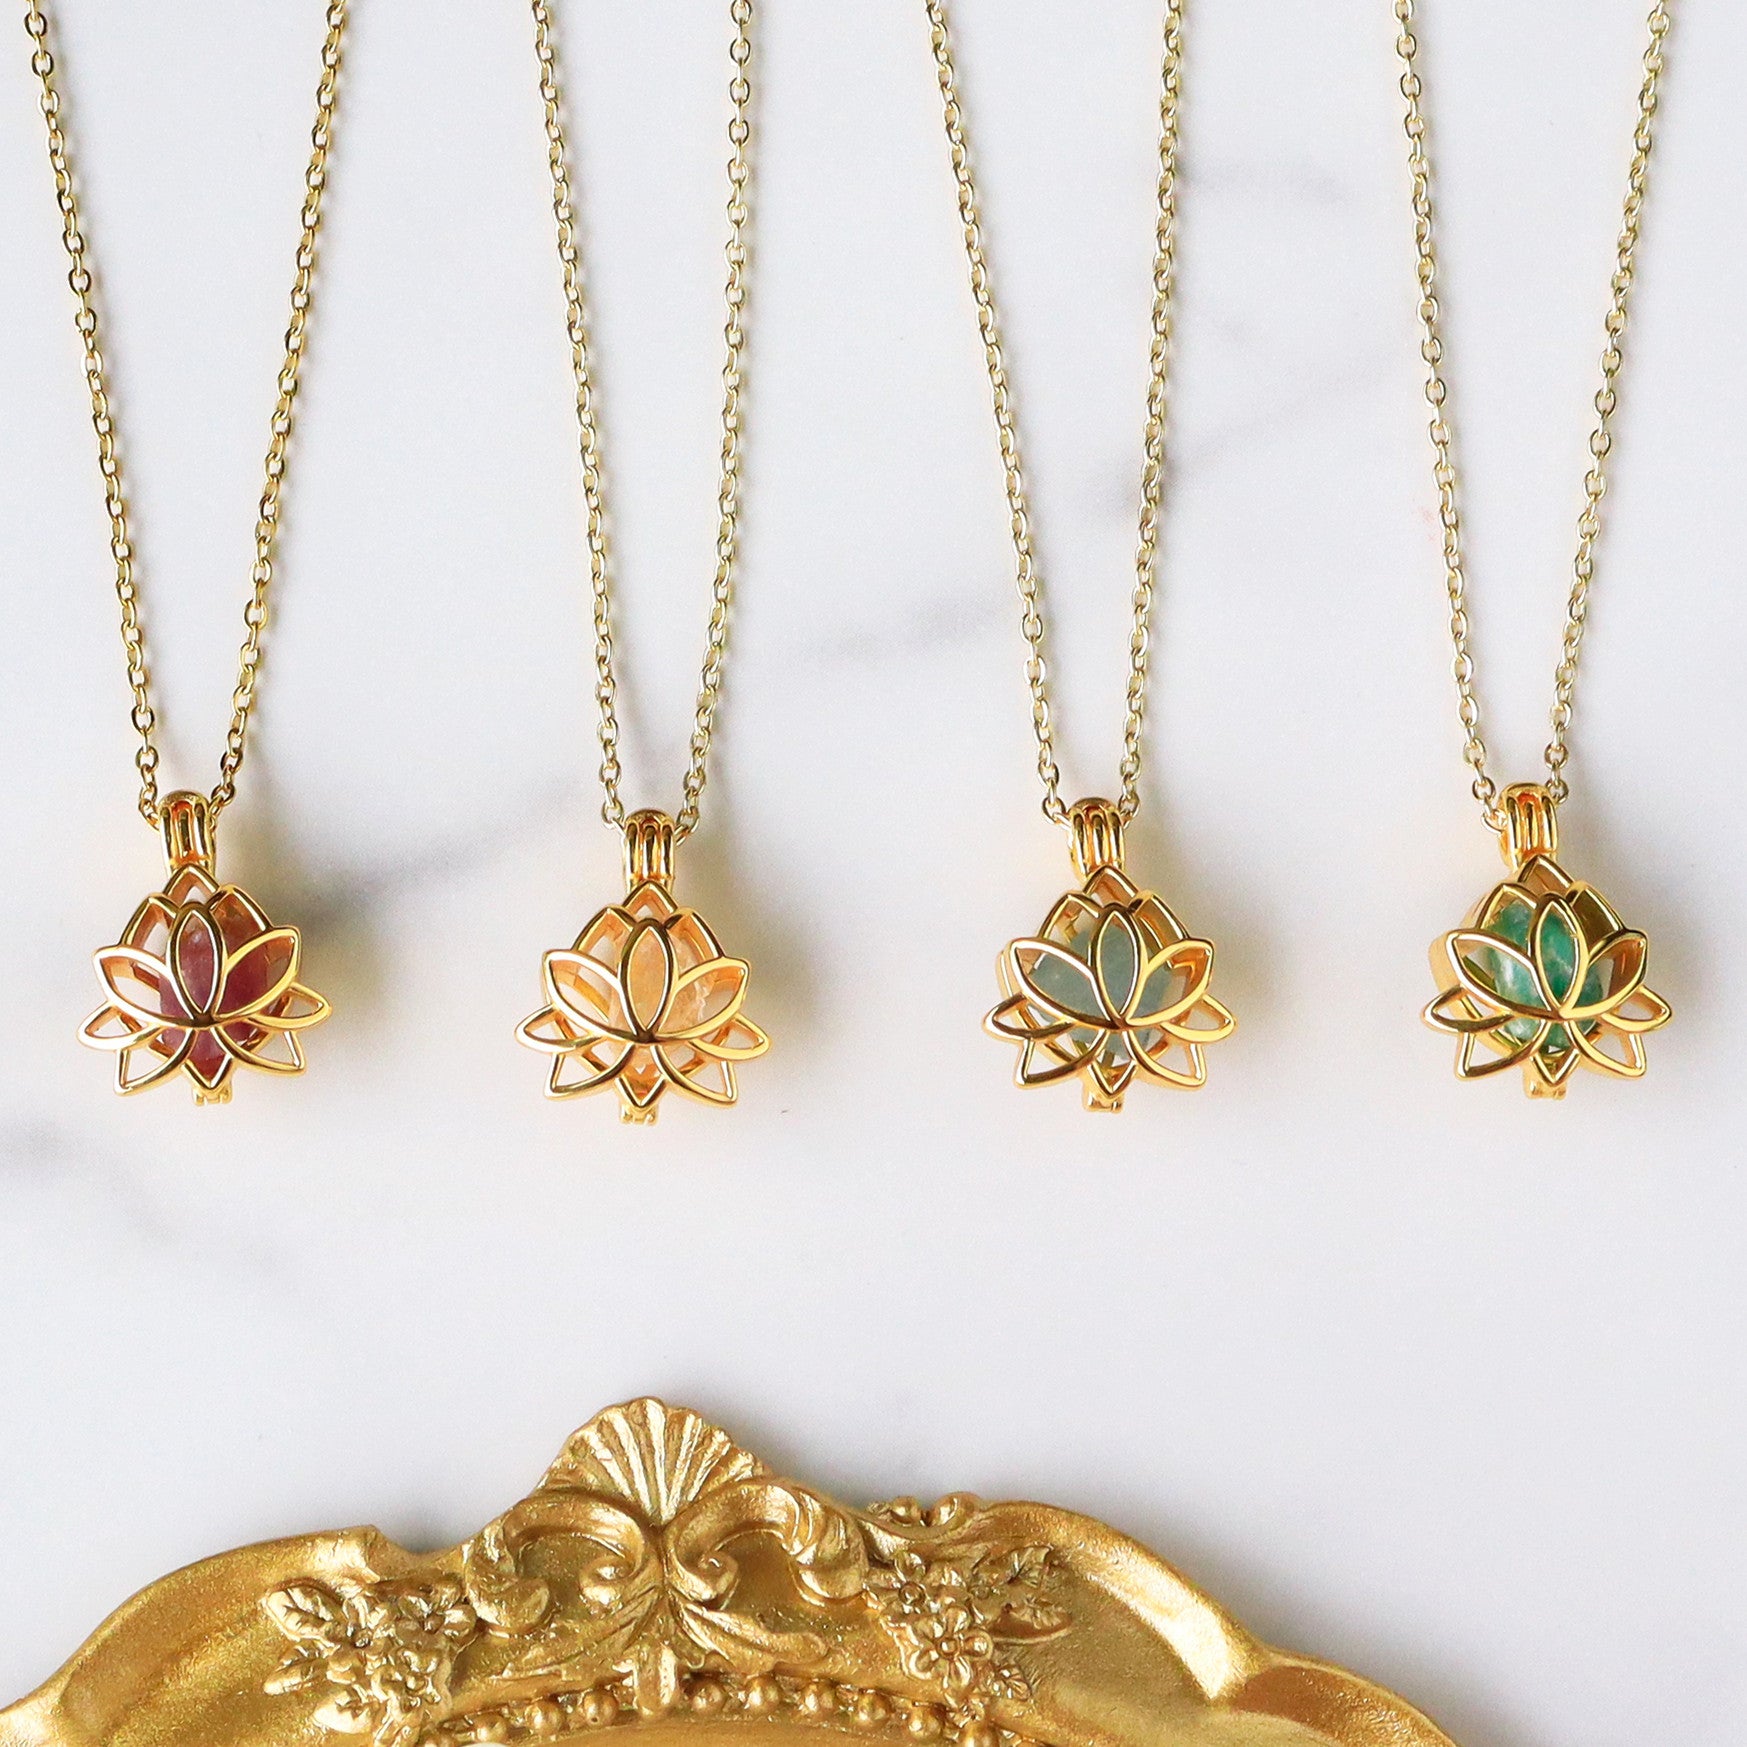 16" Gold Plated Hollow Lotus With Natural Raw Crystal Necklace, Birthstone Necklace, Gemstone Necklace Jewelry BT011